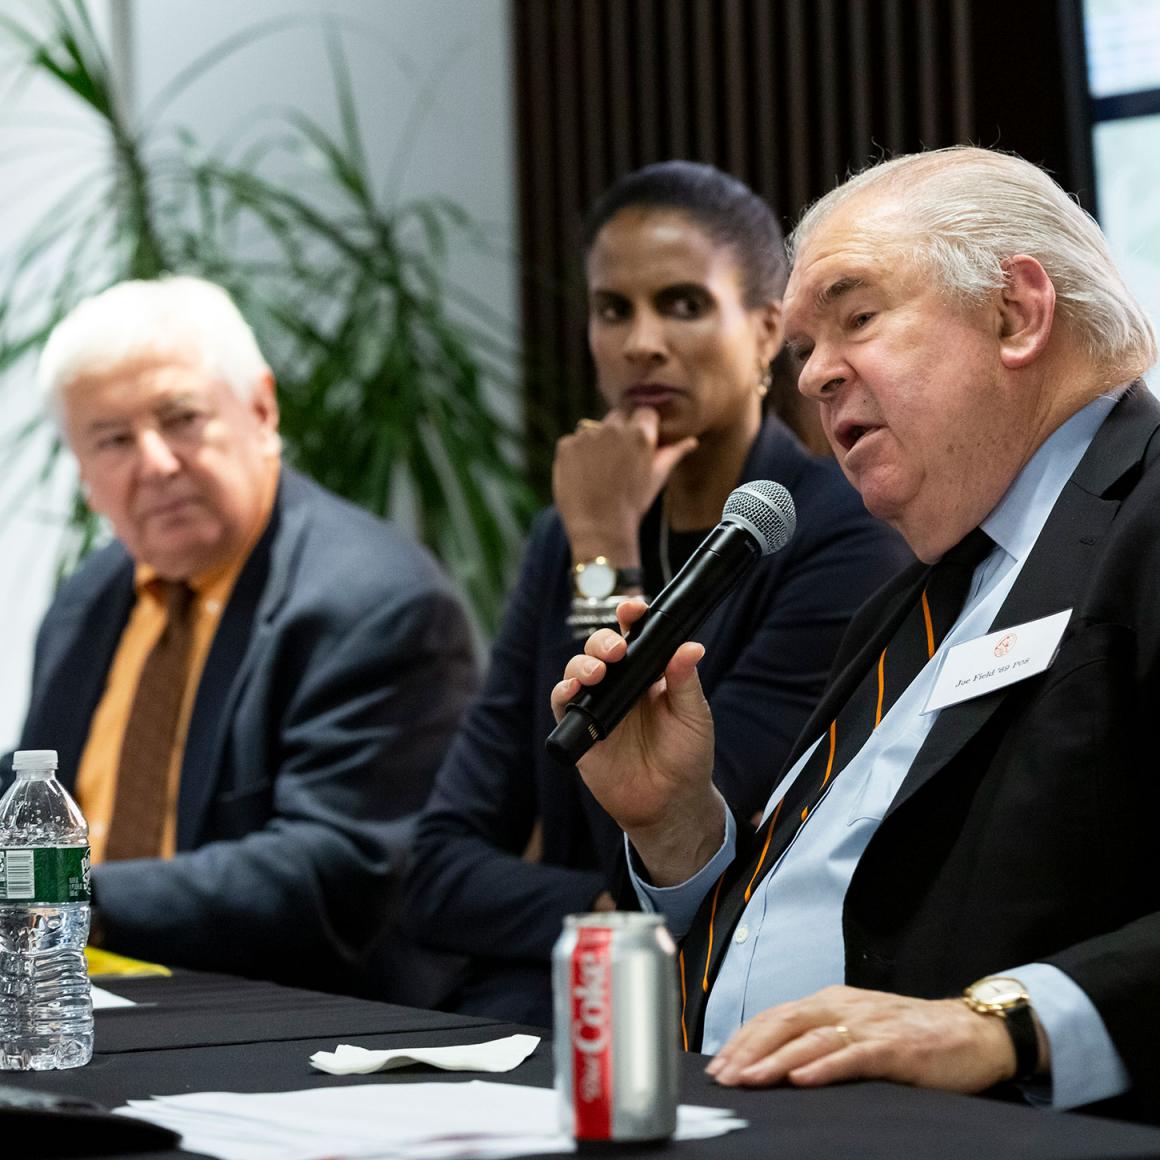 Panelists from Wealth Planning event